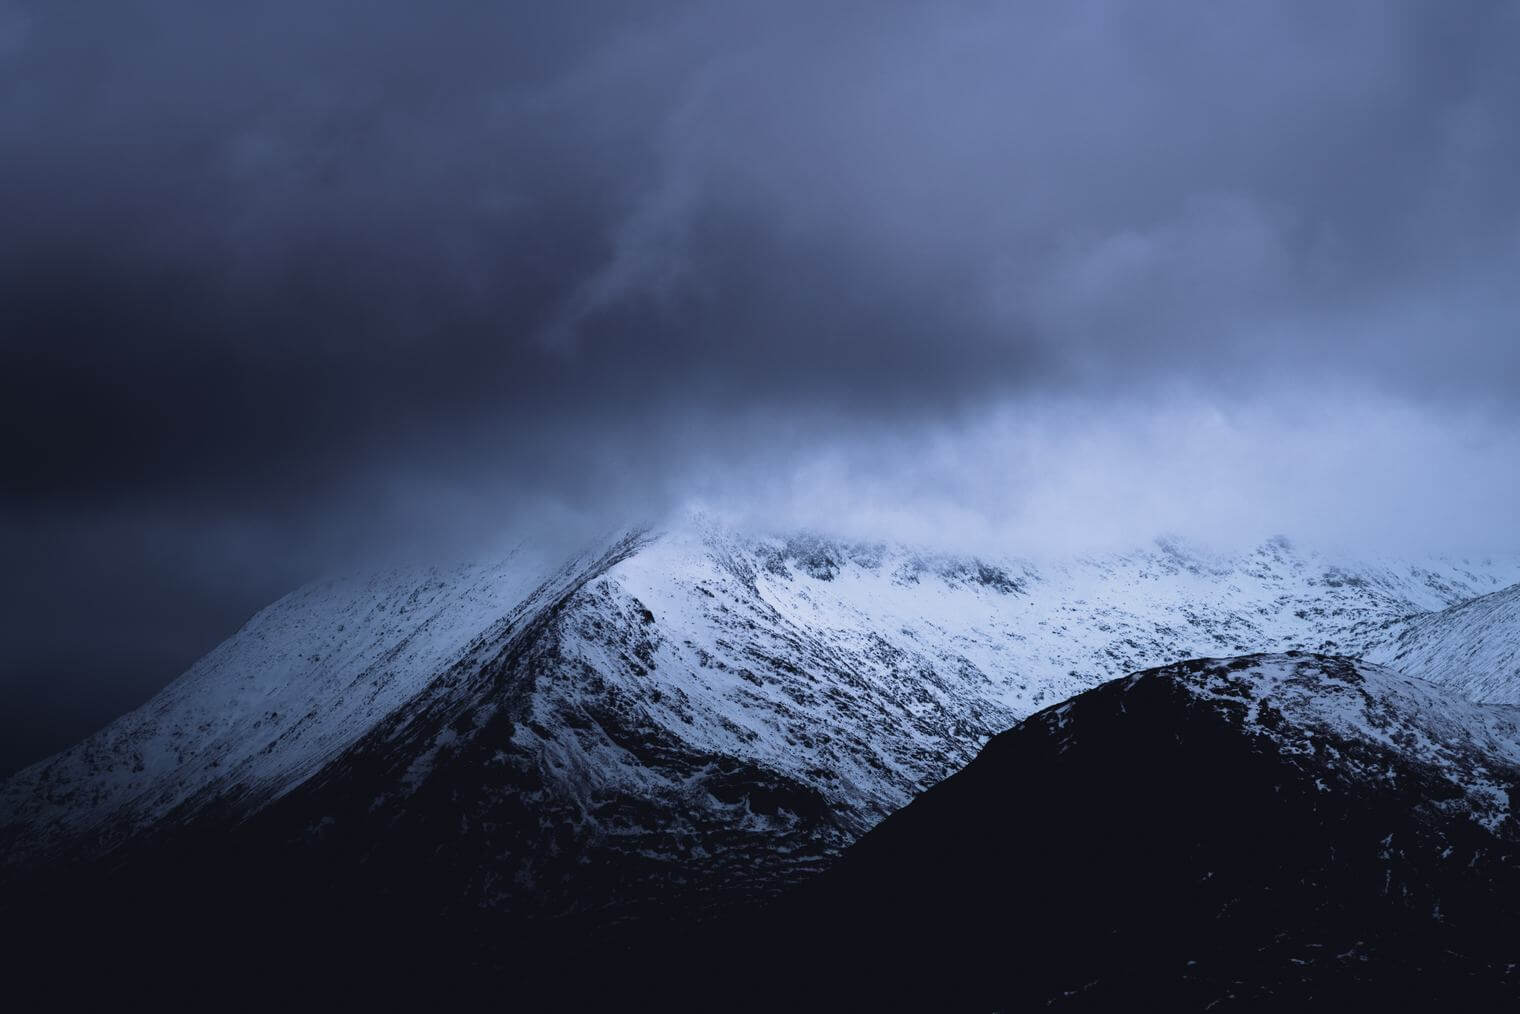 Moody mountains of Scotland with snow